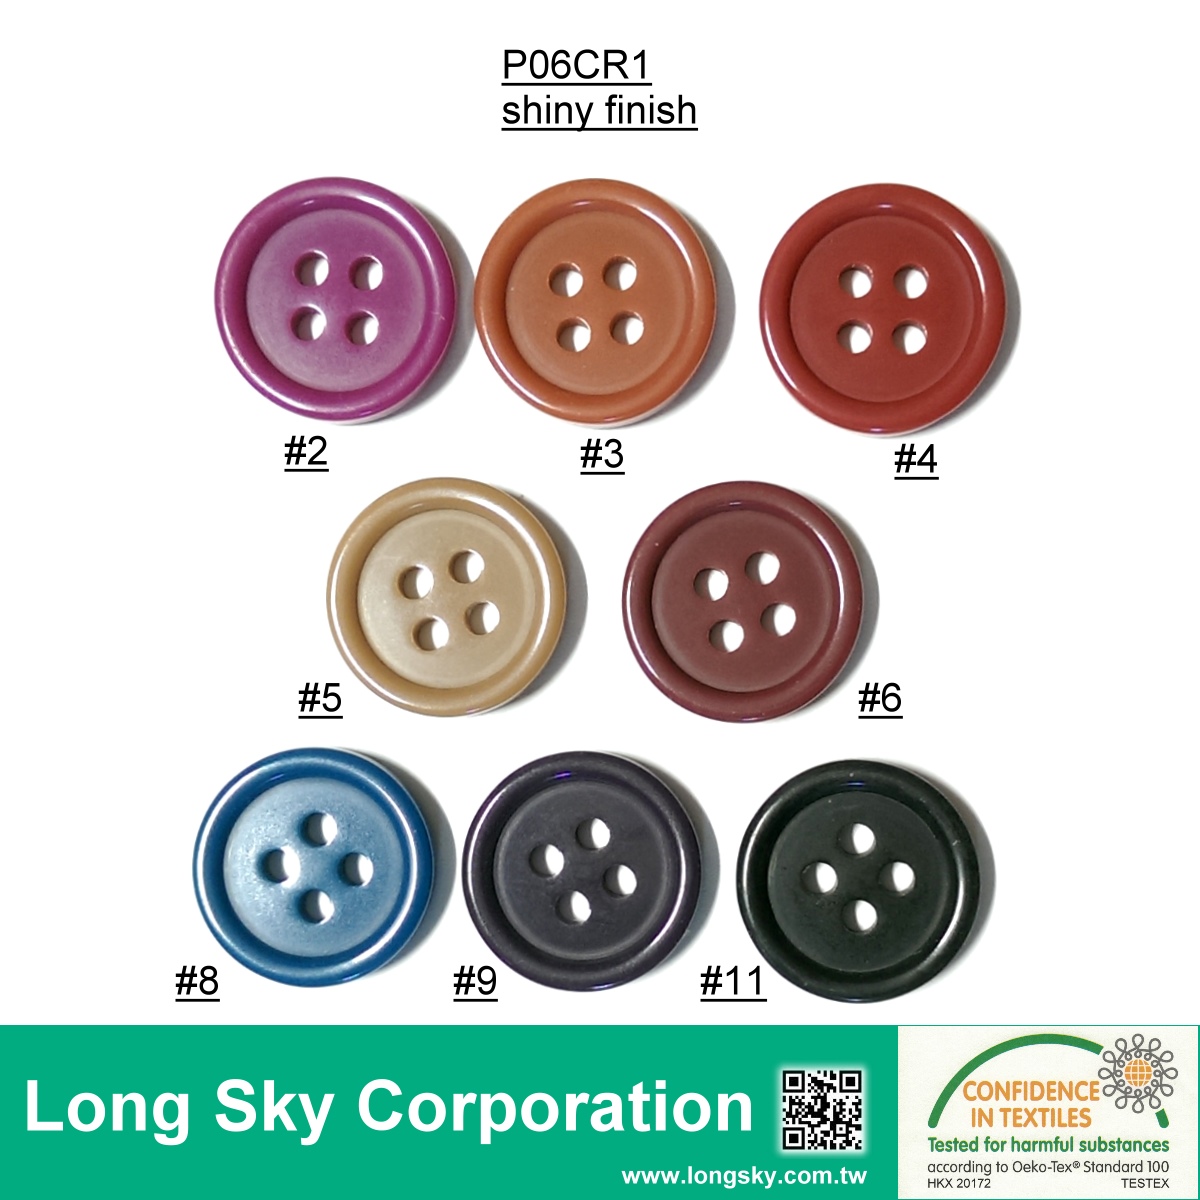 (#P06CR1-5) 15mm wine color 4-hole polyester resin children craft button